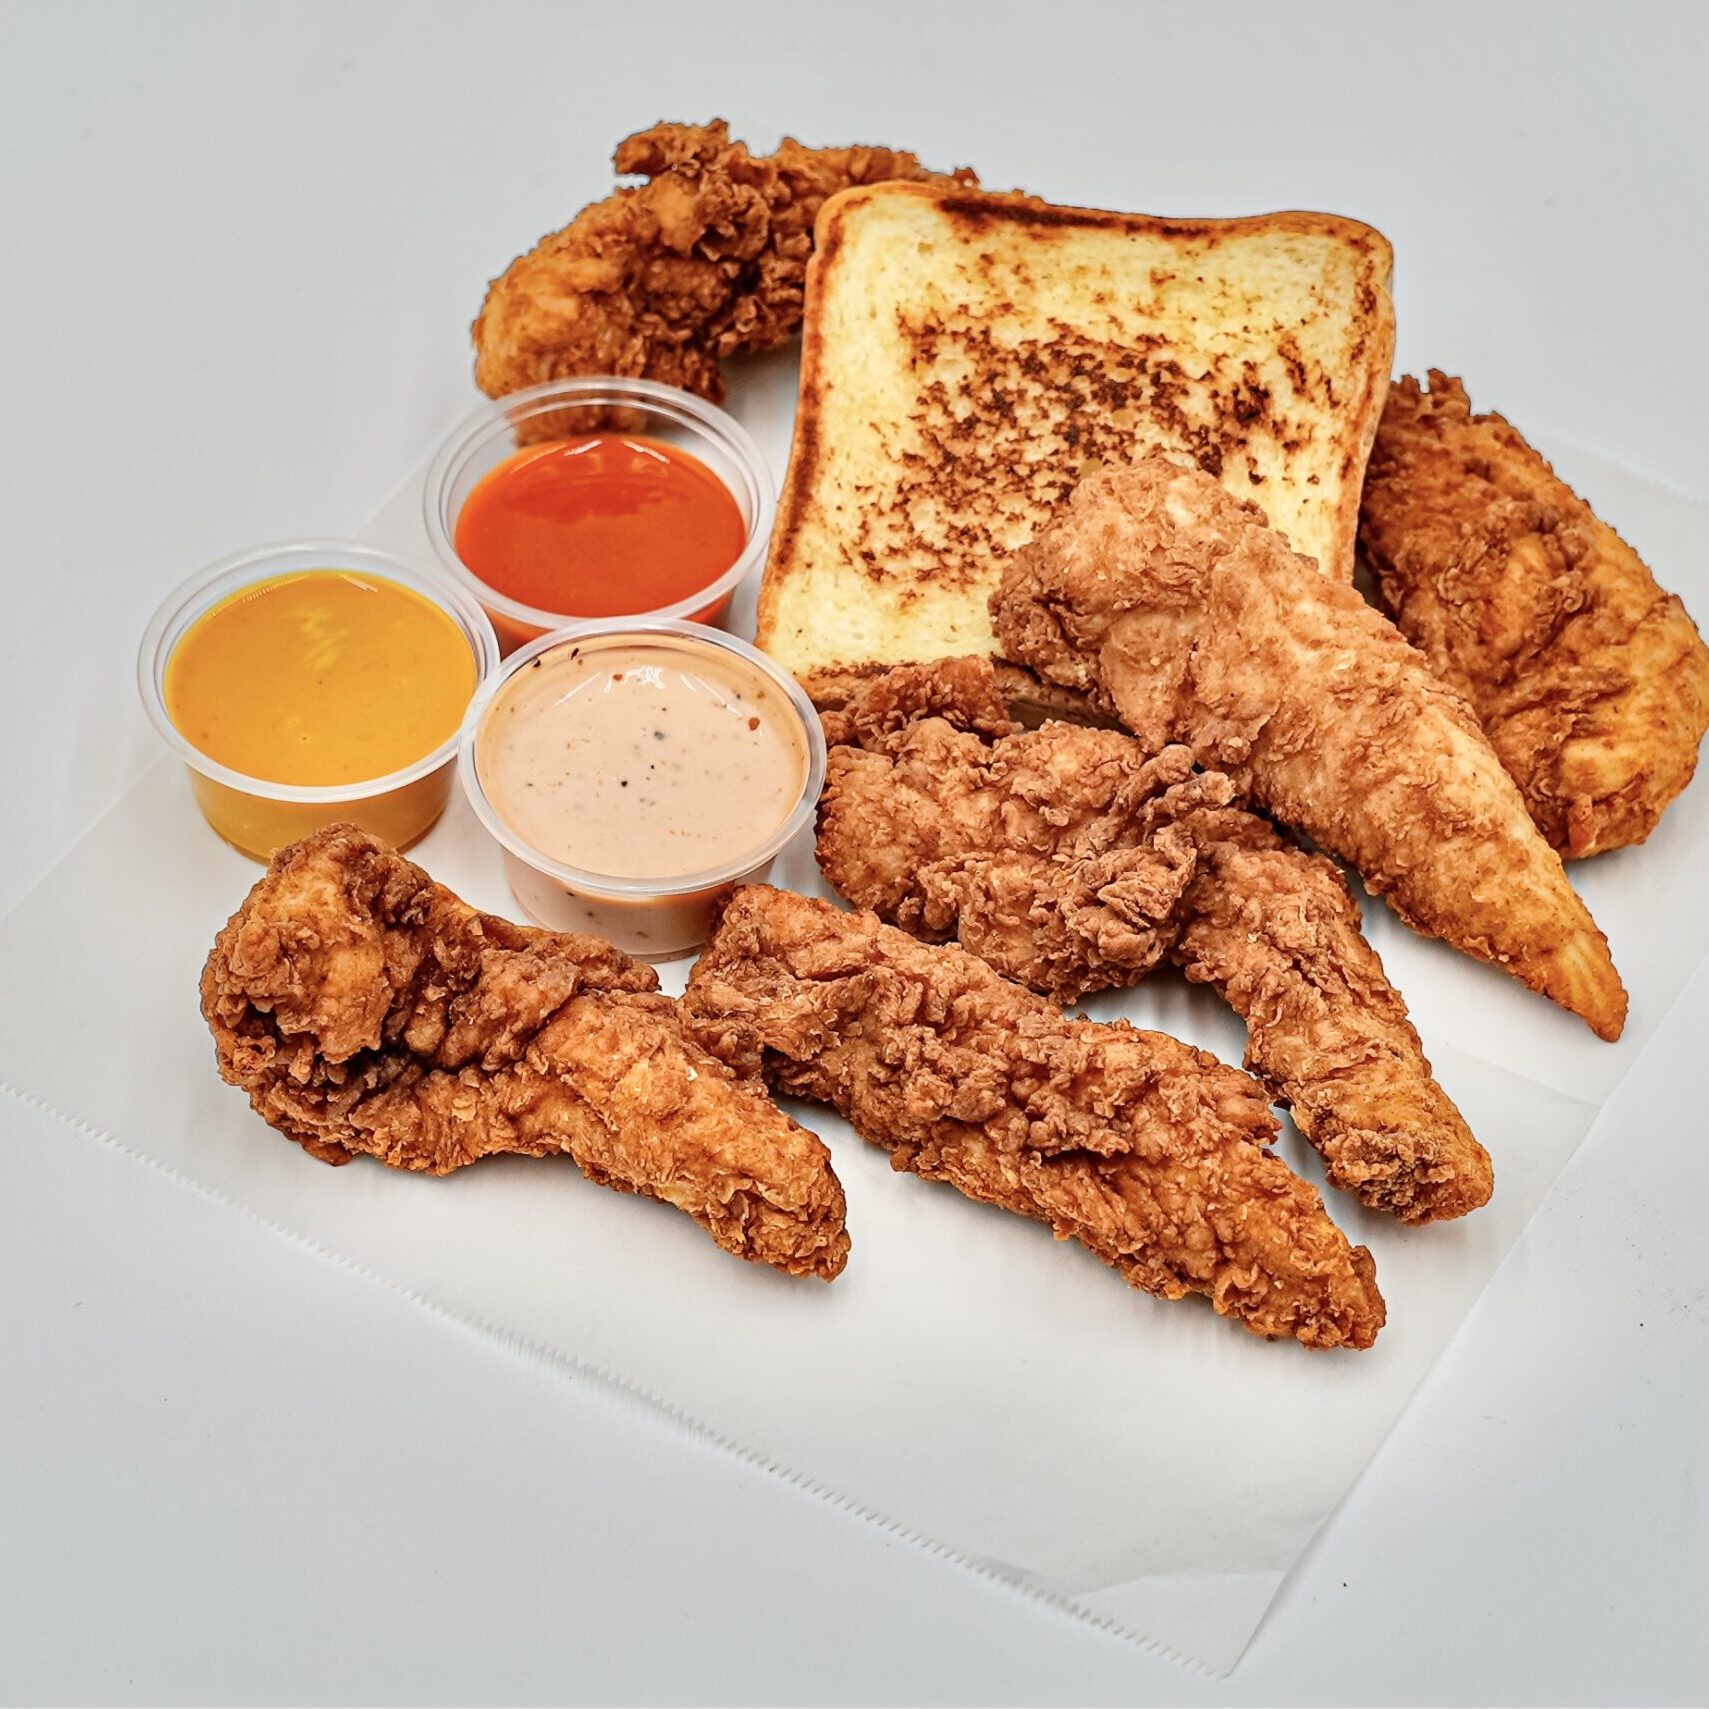 6 tender combo with Texas Toast and three sauces